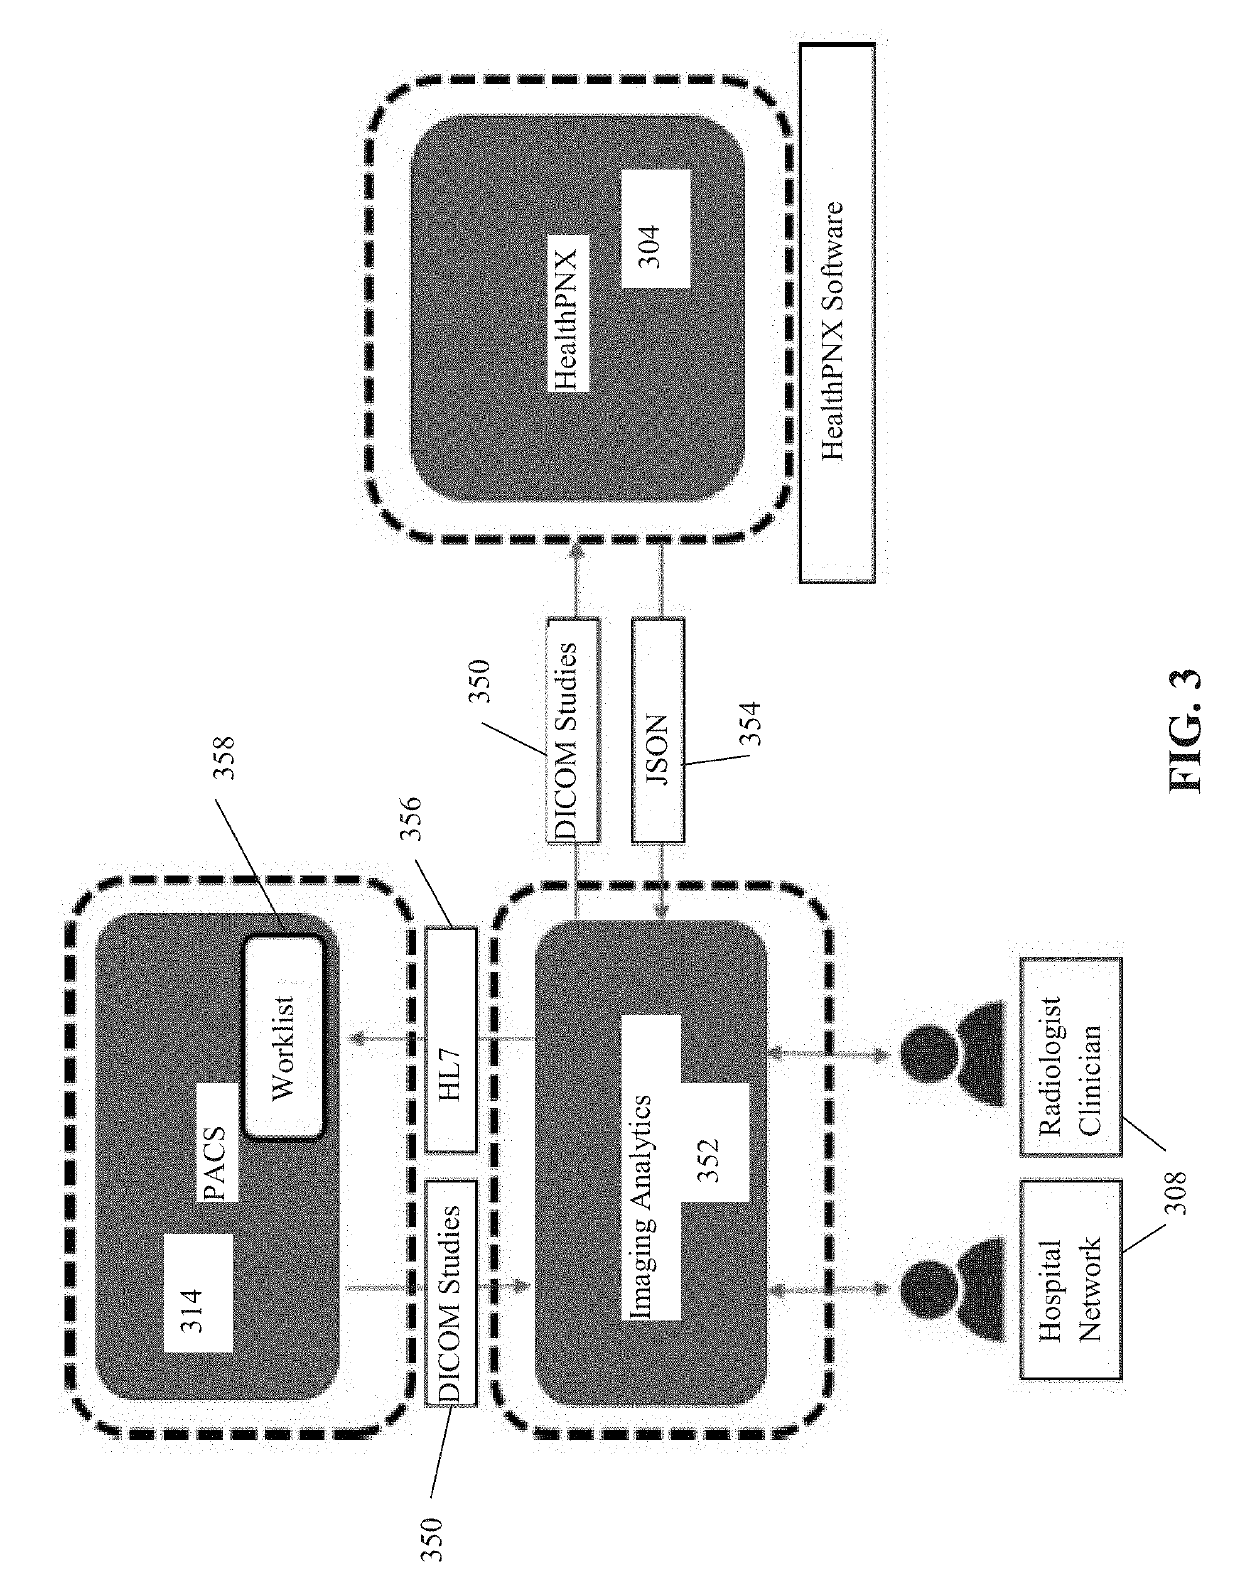 Systems and methods for detecting an indication of a visual finding type in an anatomical image